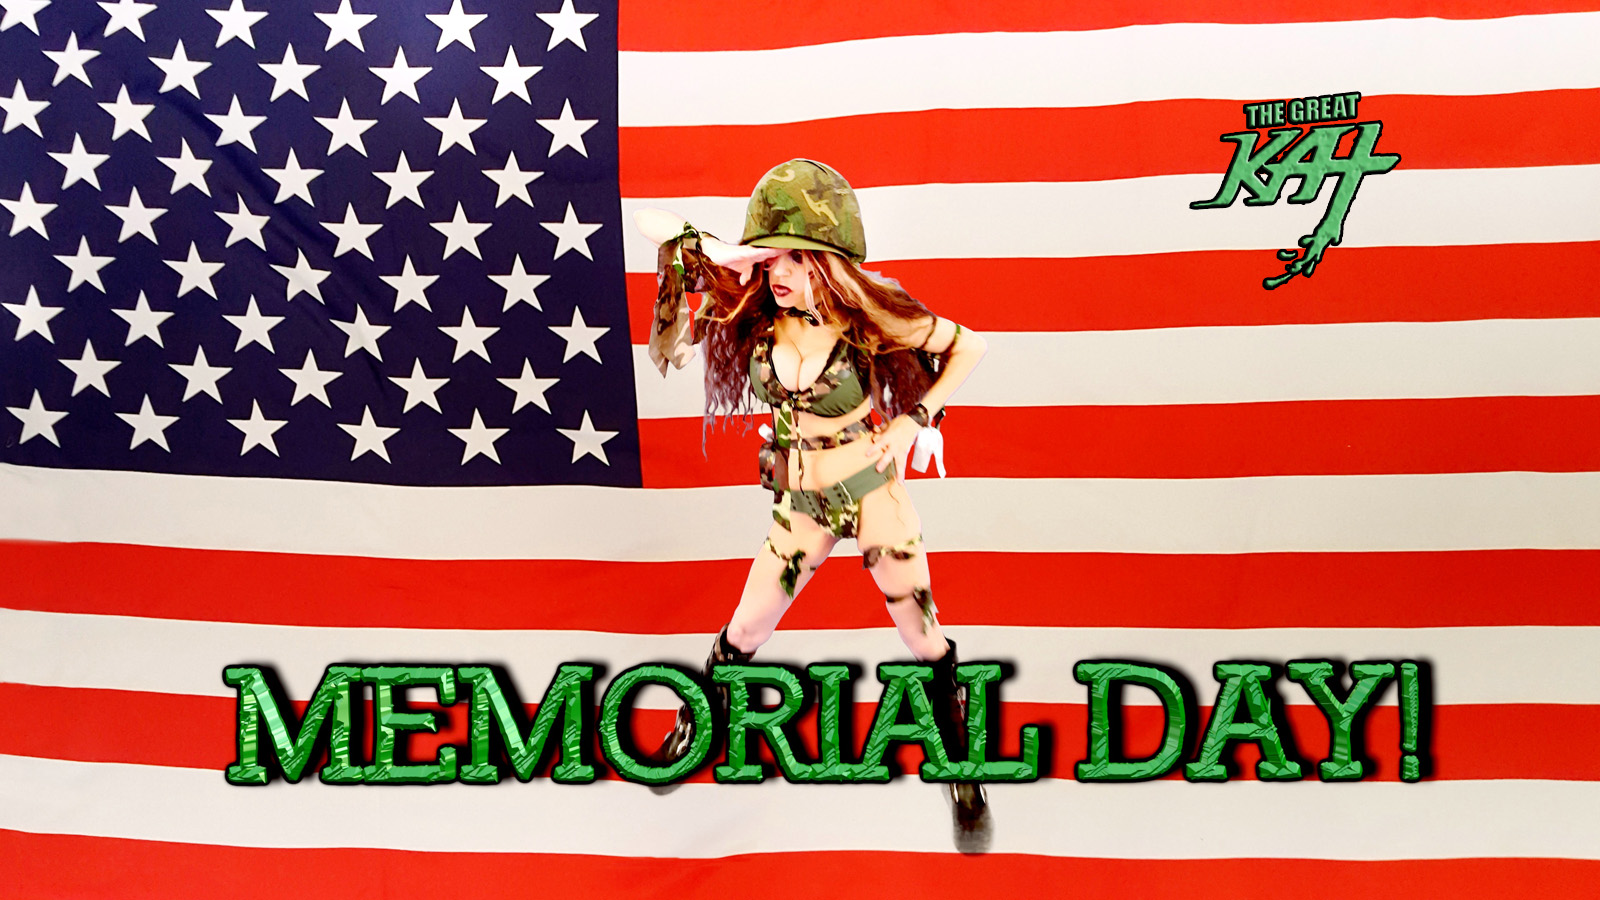 THE GREAT KAT'S "TOP 20 HOT SHRED HOLIDAYS!" "MEMORIAL DAY" From The Great Kat's NEW DVD!!!!